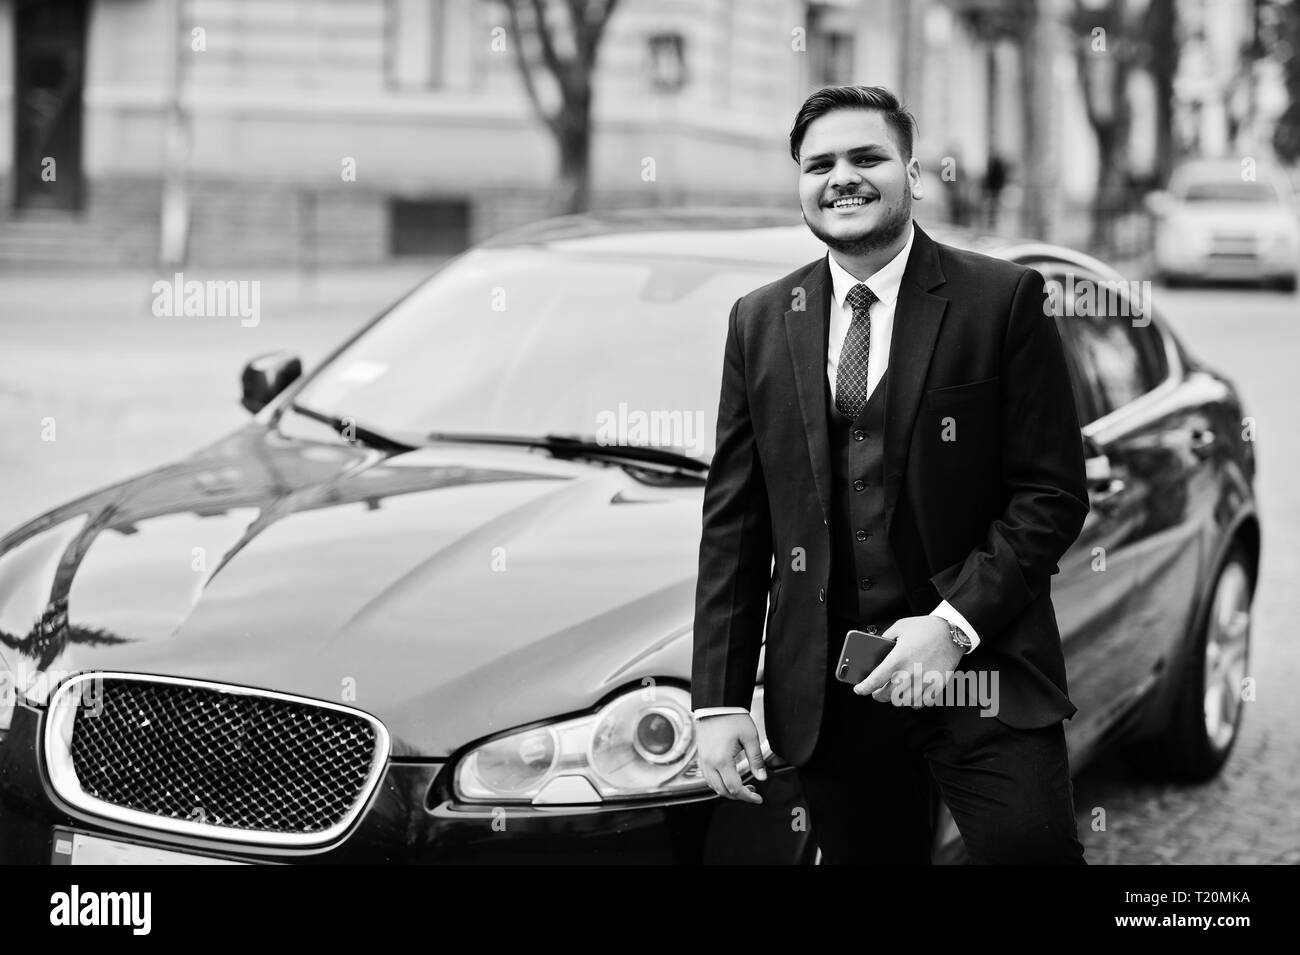 Stylish indian businessman in formal wear with mobile phone standing against black business car on street of city. Stock Photo